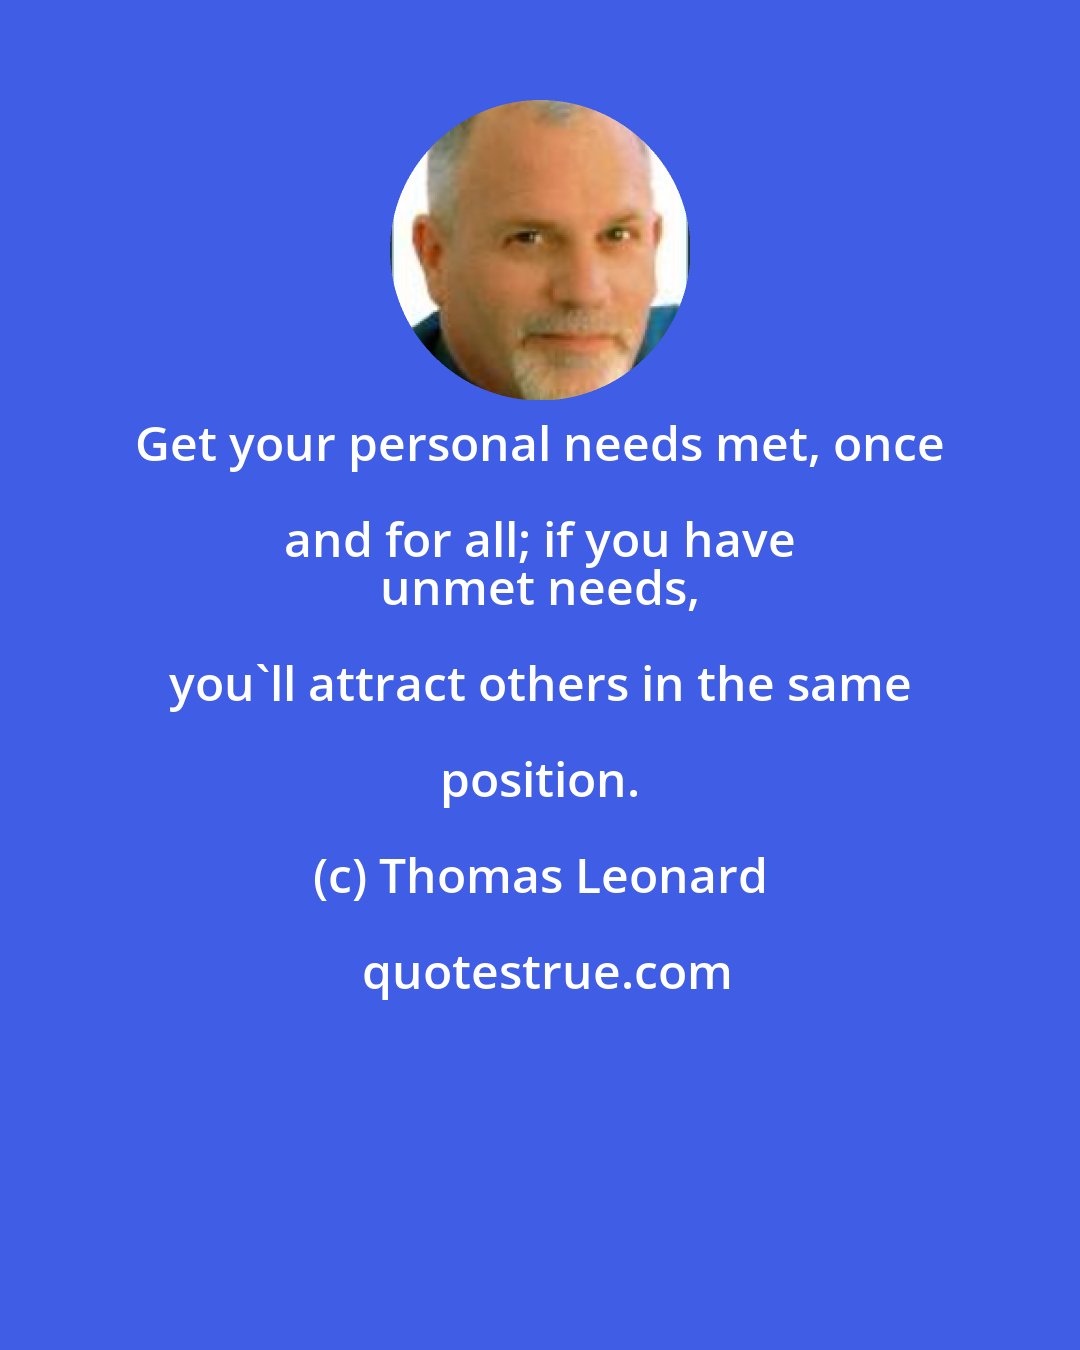 Thomas Leonard: Get your personal needs met, once and for all; if you have 
 unmet needs, you'll attract others in the same position.